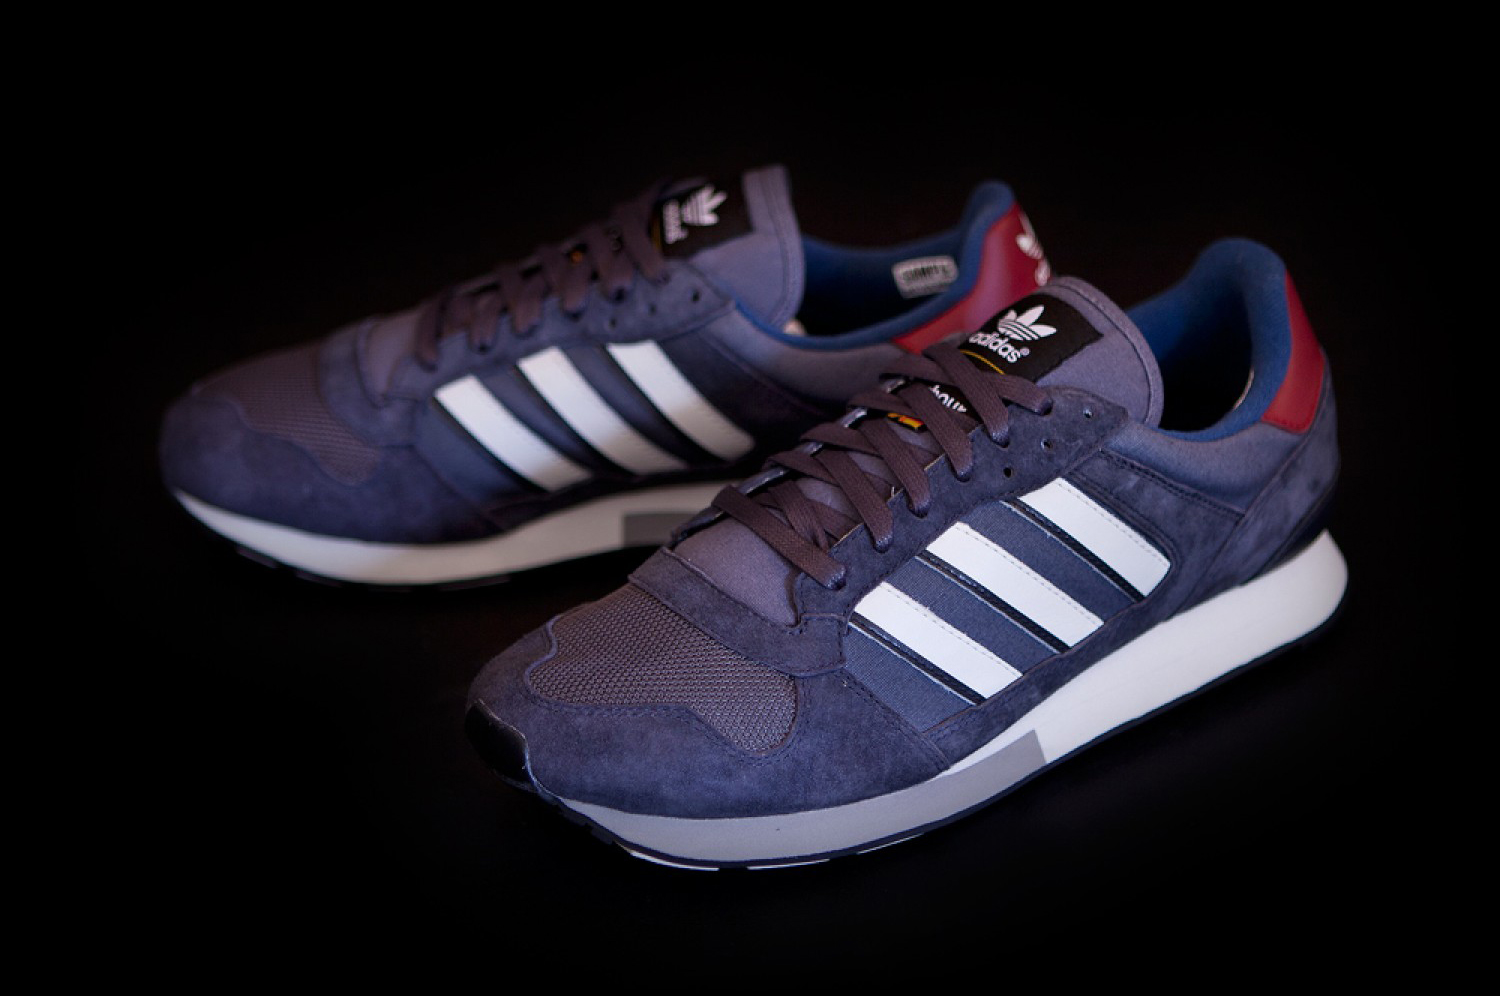 Barbour x adidas Originals Fall/Winter 2014 Collection | Sole Collector